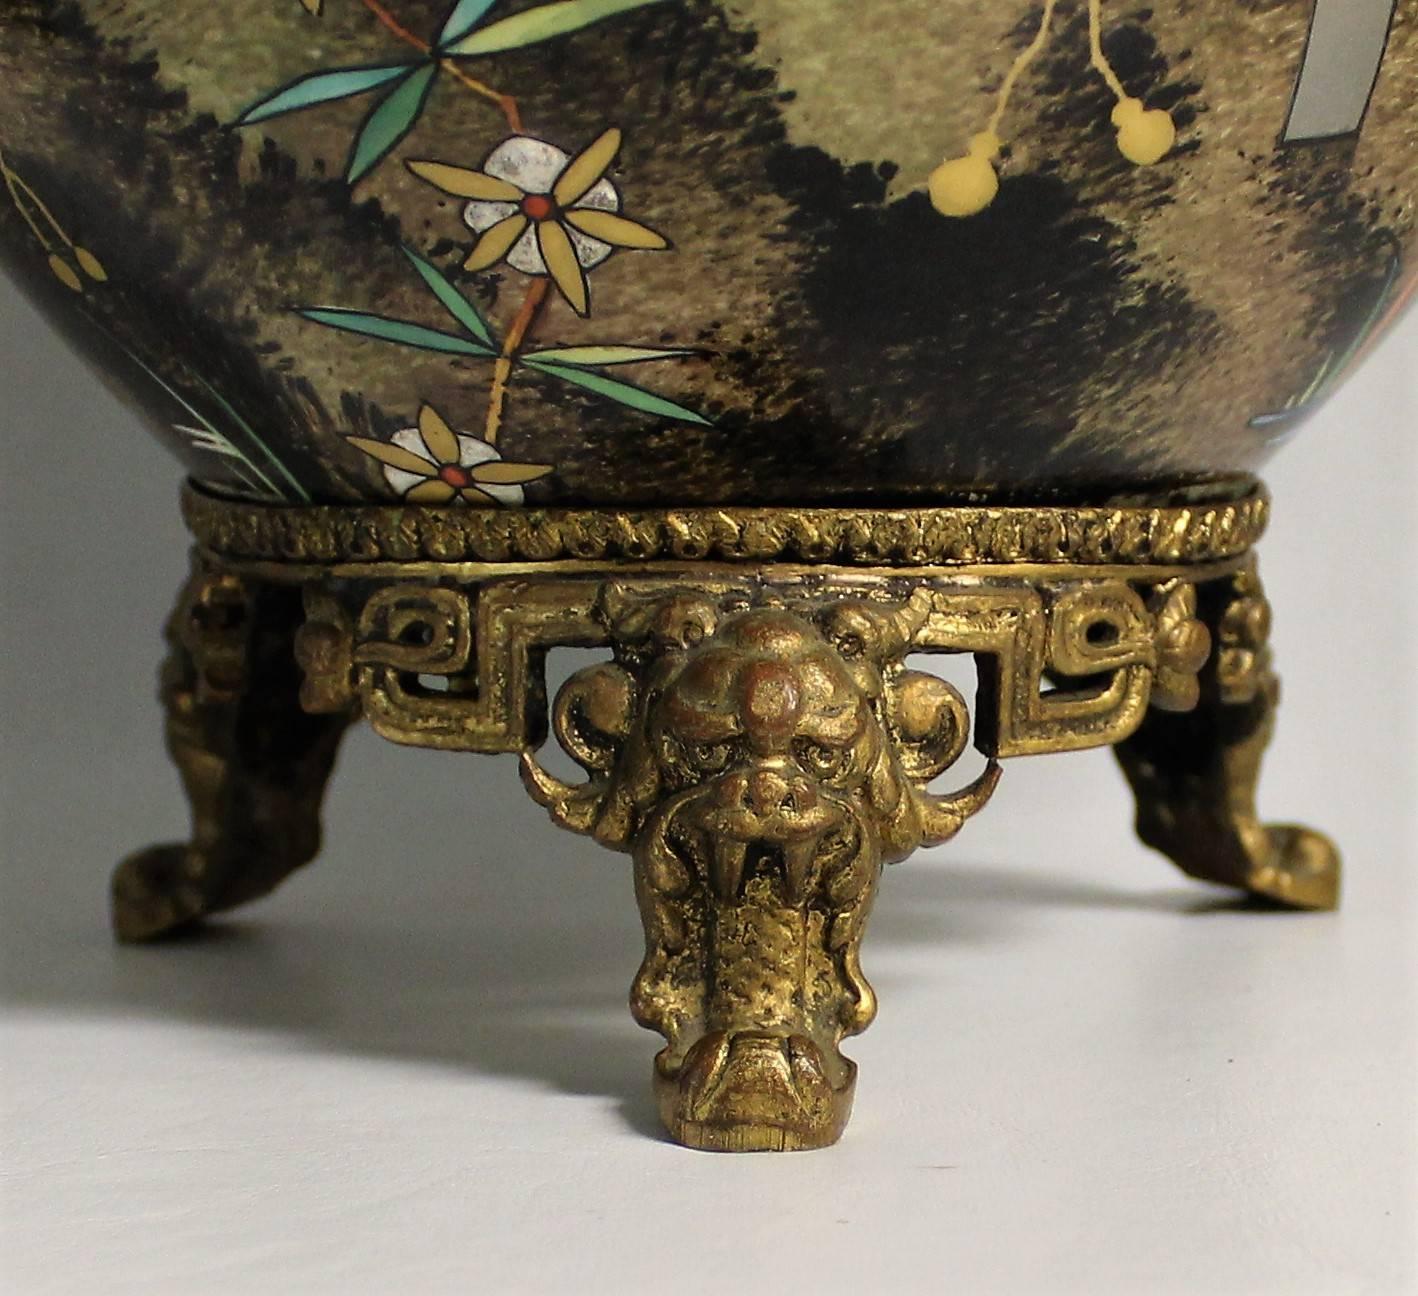 19th Century Pair of Japonisme Porcelain and Ormolu Mounted Aesthethic Movement Vase's For Sale